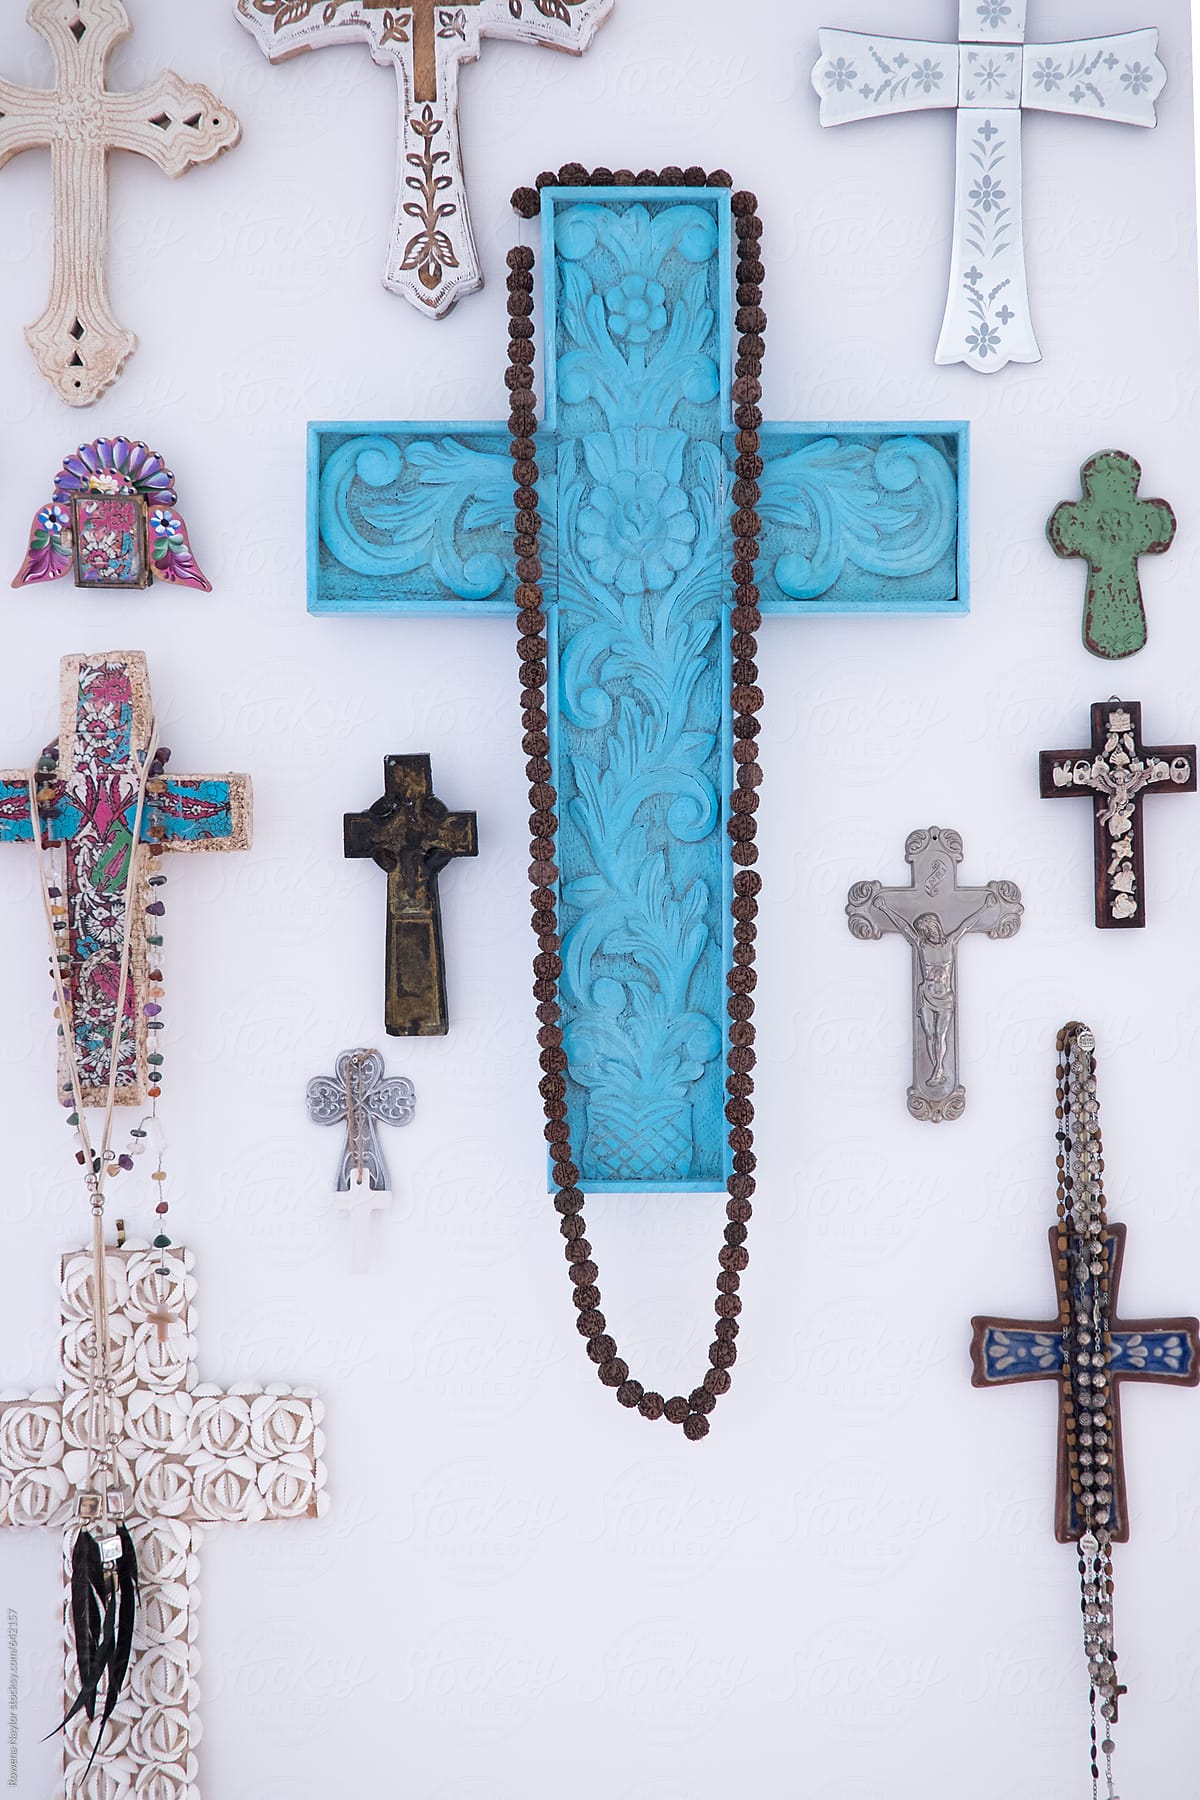 Collection of Catholic crosses hung on wall